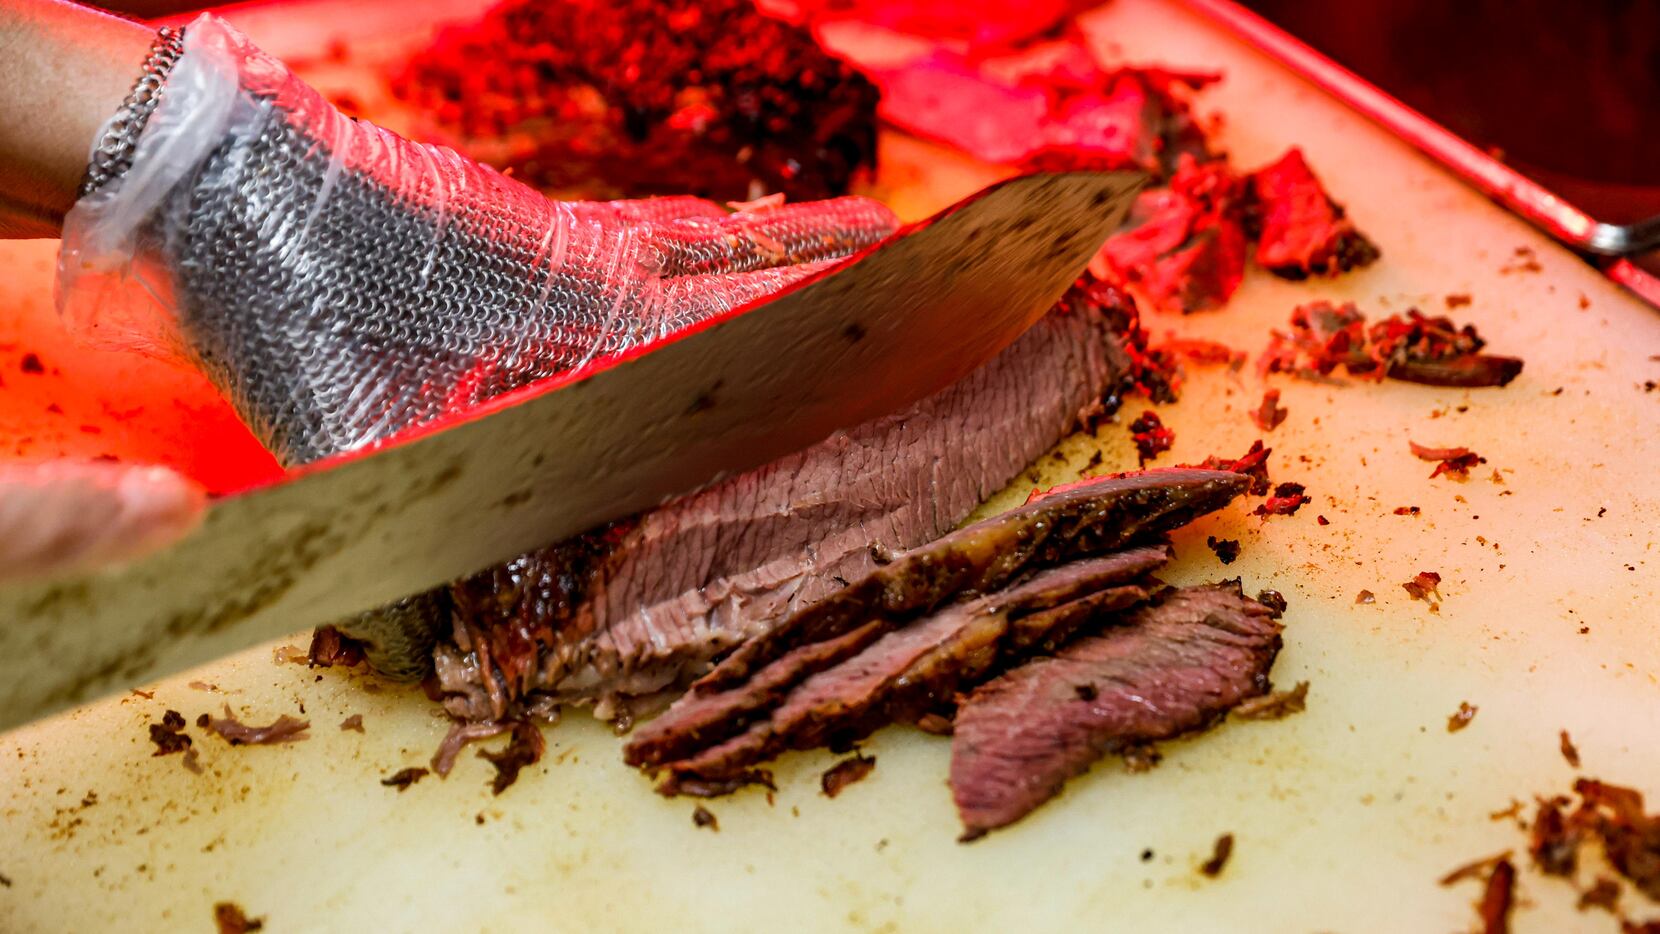 The most popular order at Sonny Bryan's Smokehouse is a chopped brisket sandwich. The...